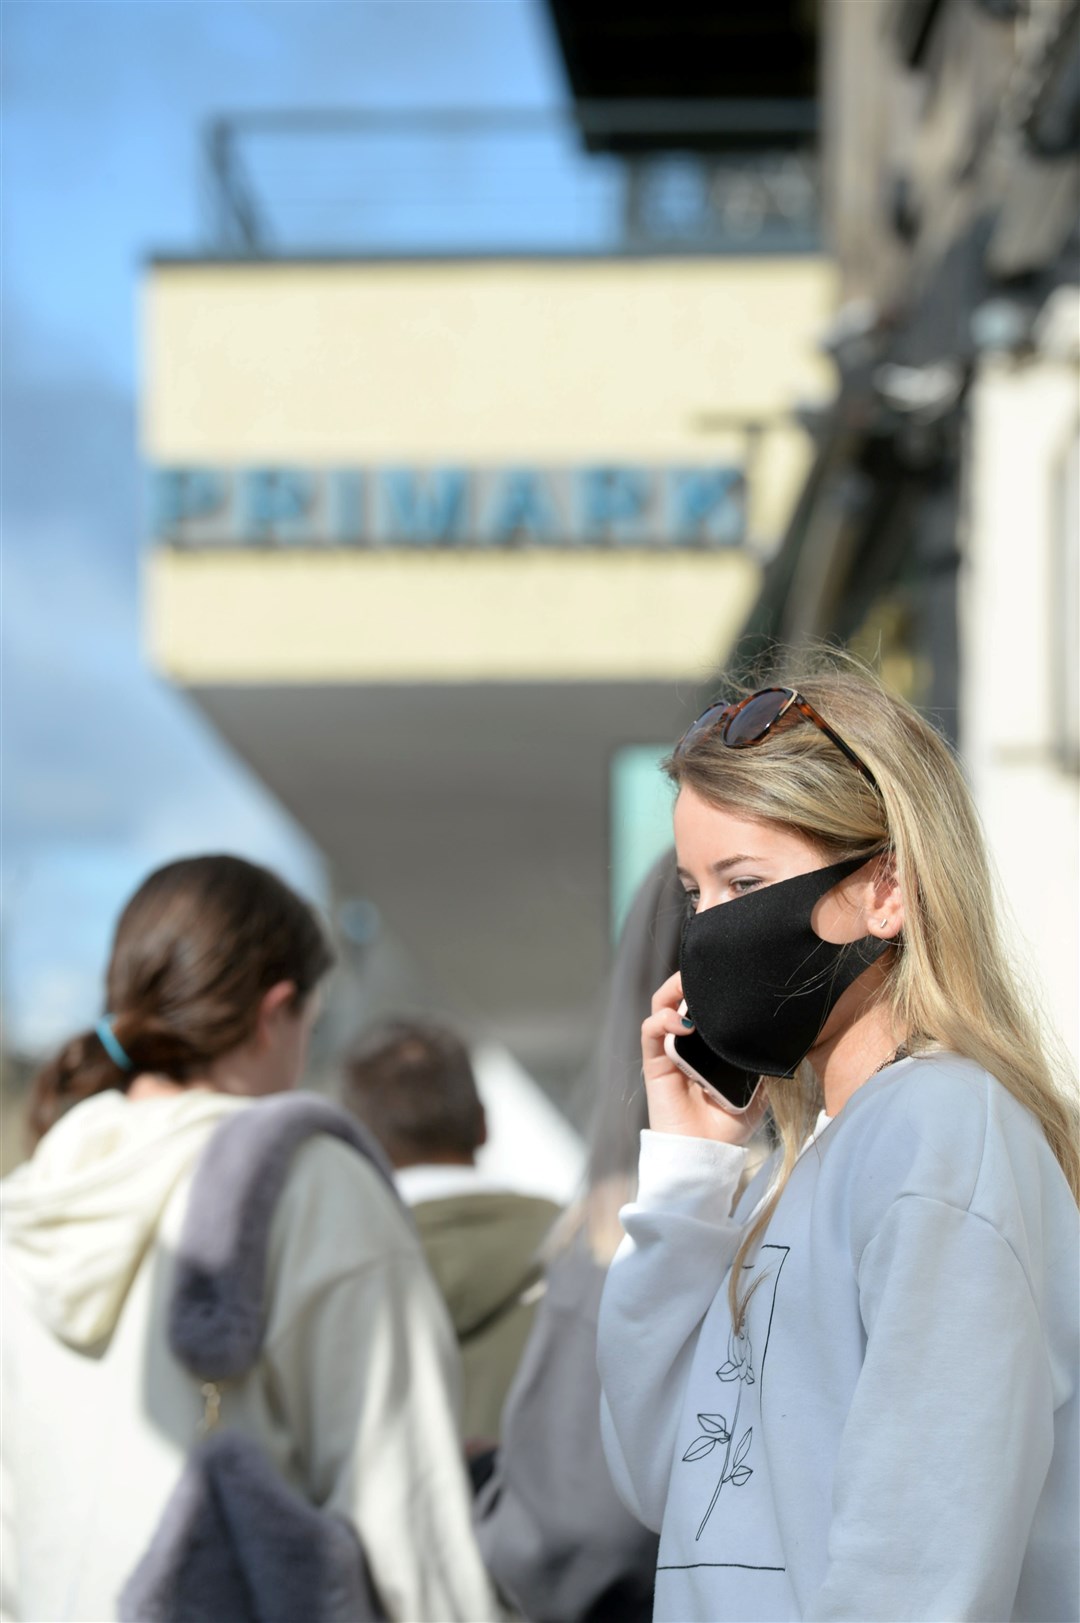 A number of shoppers were also following advice to wear face coverings.